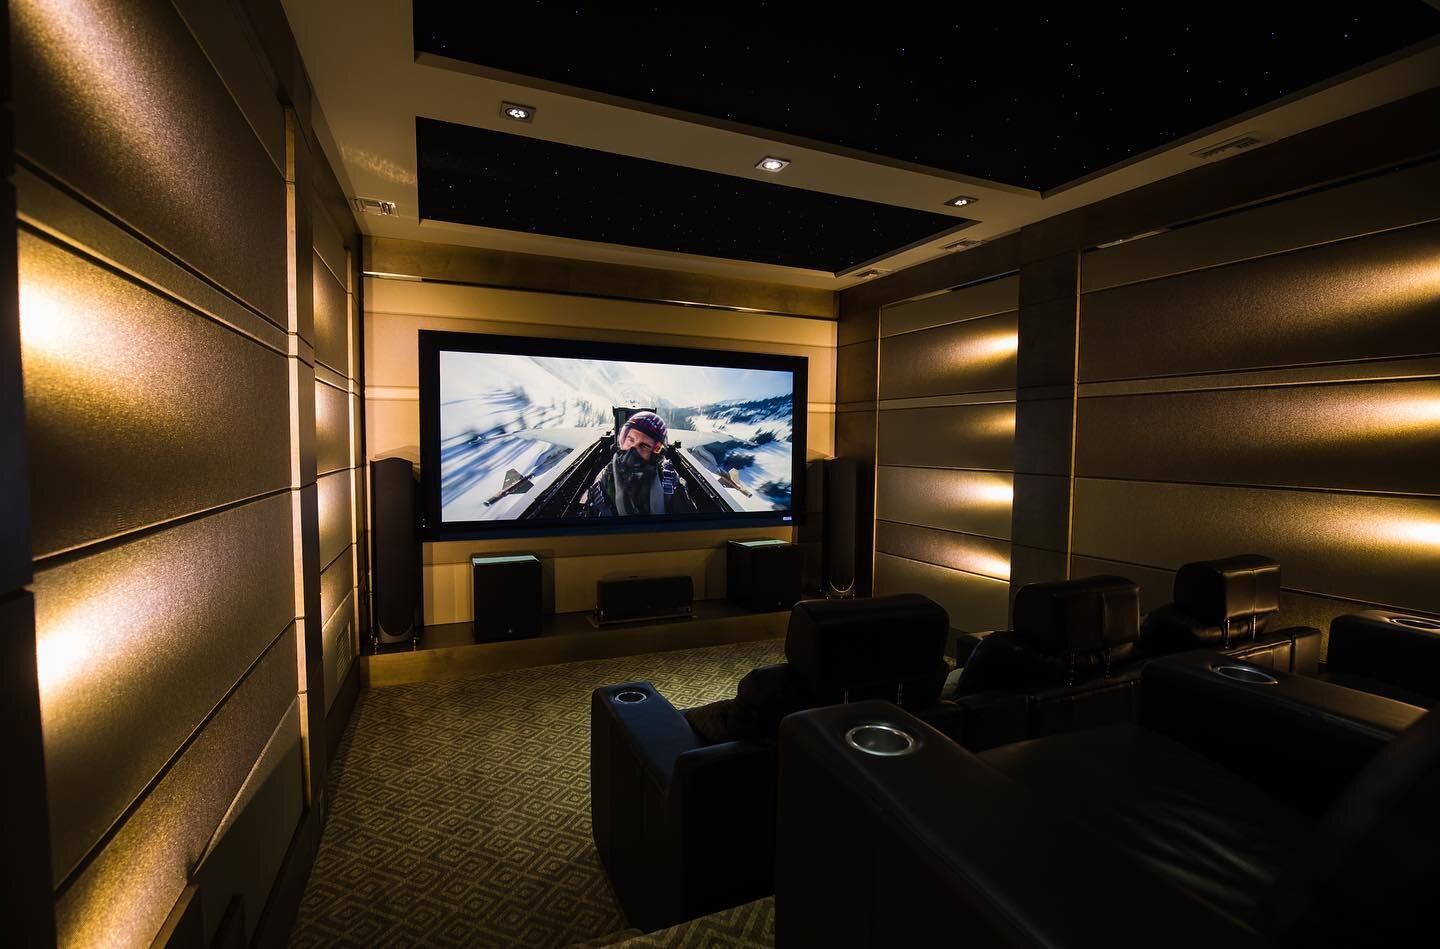 Next time you&rsquo;re at a commercial theatre ask them how many JL Audio fathoms they have&hellip;. This home theatre just got 2; the audio and video performance exceeds any commercial theatre.

Let us bring your dreams to reality.

#jlaudio #yeg #y